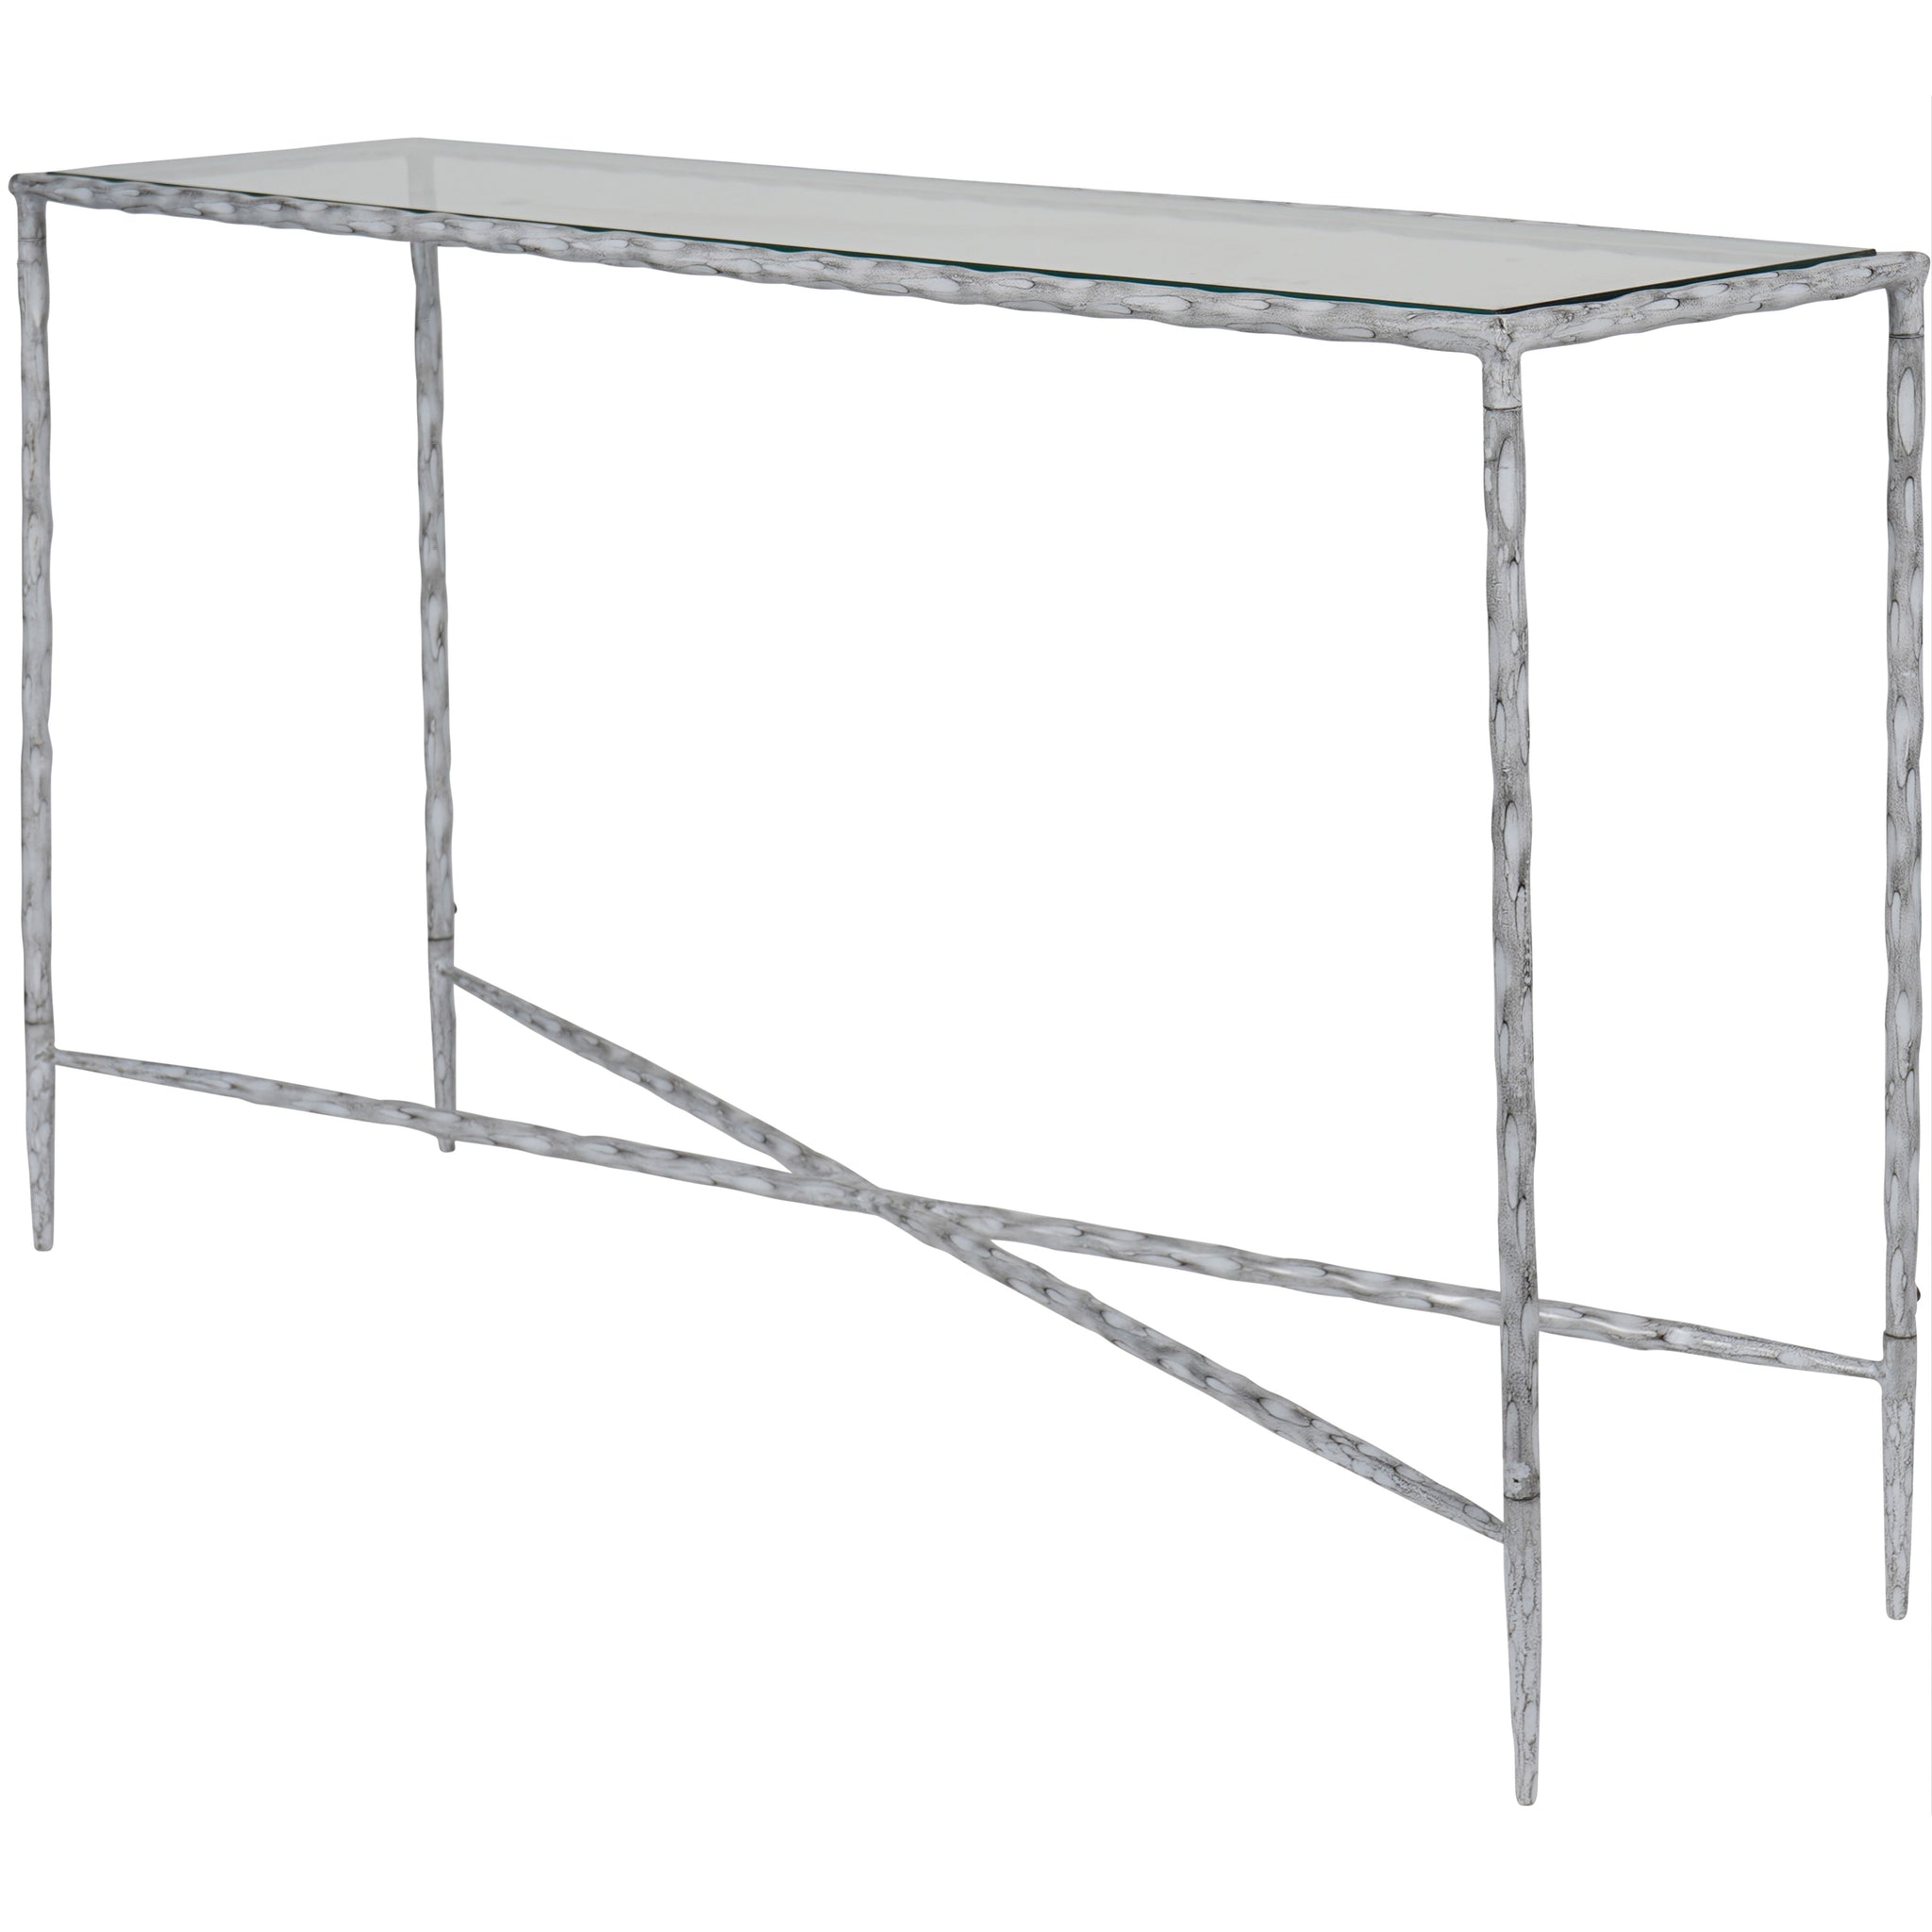 Dalton Hand Forged Console Table Large Chalk White with Glass Top 140x35cm